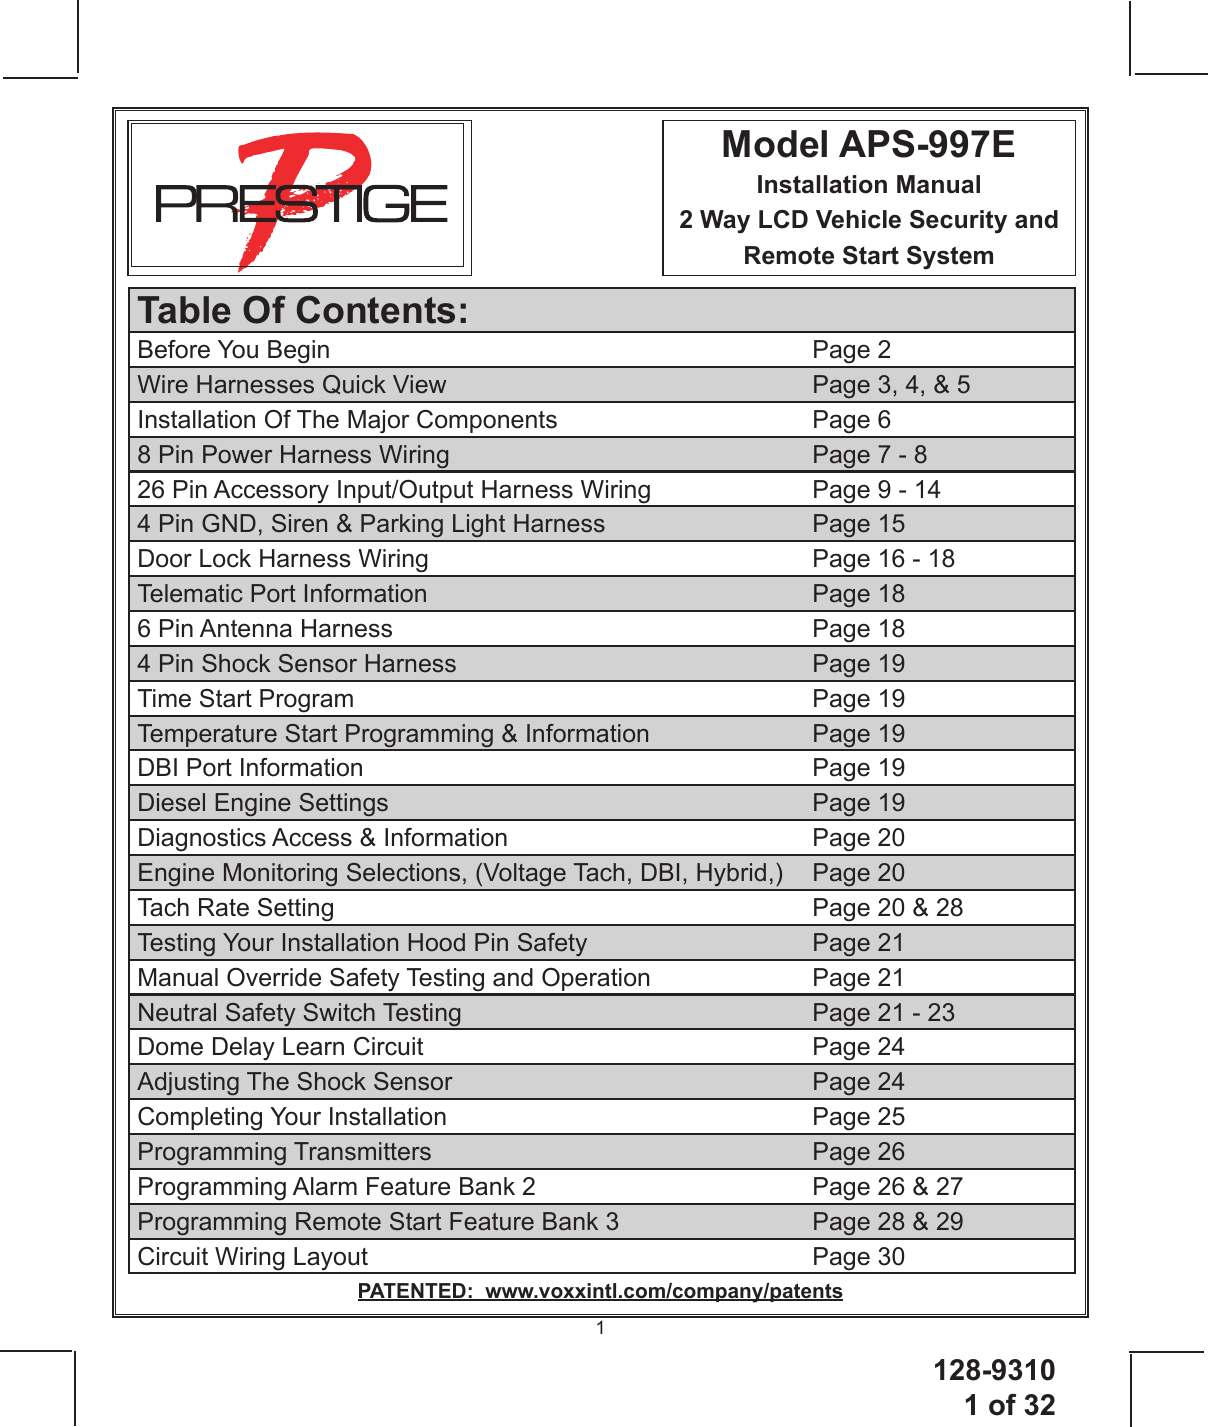 128-93101 of 321Model APS-997EInstallation Manual2 Way LCD Vehicle Security and Remote Start System PATENTED:  www.voxxintl.com/company/patentsTable Of Contents:Before You Begin       Page 2Wire Harnesses Quick View          Page 3, 4, &amp; 5Installation Of The Major Components        Page 68 Pin Power Harness Wiring          Page 7 - 826 Pin Accessory Input/Output Harness Wiring      Page 9 - 144 Pin GND, Siren &amp; Parking Light Harness      Page 15Door Lock Harness Wiring            Page 16 - 18Telematic Port Information      Page 186 Pin Antenna Harness      Page 184 Pin Shock Sensor Harness          Page 19Time Start Program  Page 19Temperature Start Programming &amp; Information      Page 19DBI Port Information       Page 19Diesel Engine Settings       Page 19Diagnostics Access &amp; Information     Page 20Engine Monitoring Selections, (Voltage Tach, DBI, Hybrid,)  Page 20Tach Rate Setting       Page 20 &amp; 28Testing Your Installation Hood Pin Safety      Page 21Manual Override Safety Testing and Operation      Page 21Neutral Safety Switch Testing          Page 21 - 23Dome Delay Learn Circuit      Page 24Adjusting The Shock Sensor     Page 24Completing Your Installation     Page 25Programming Transmitters      Page 26Programming Alarm Feature Bank 2        Page 26 &amp; 27Programming Remote Start Feature Bank 3      Page 28 &amp; 29Circuit Wiring Layout      Page 30